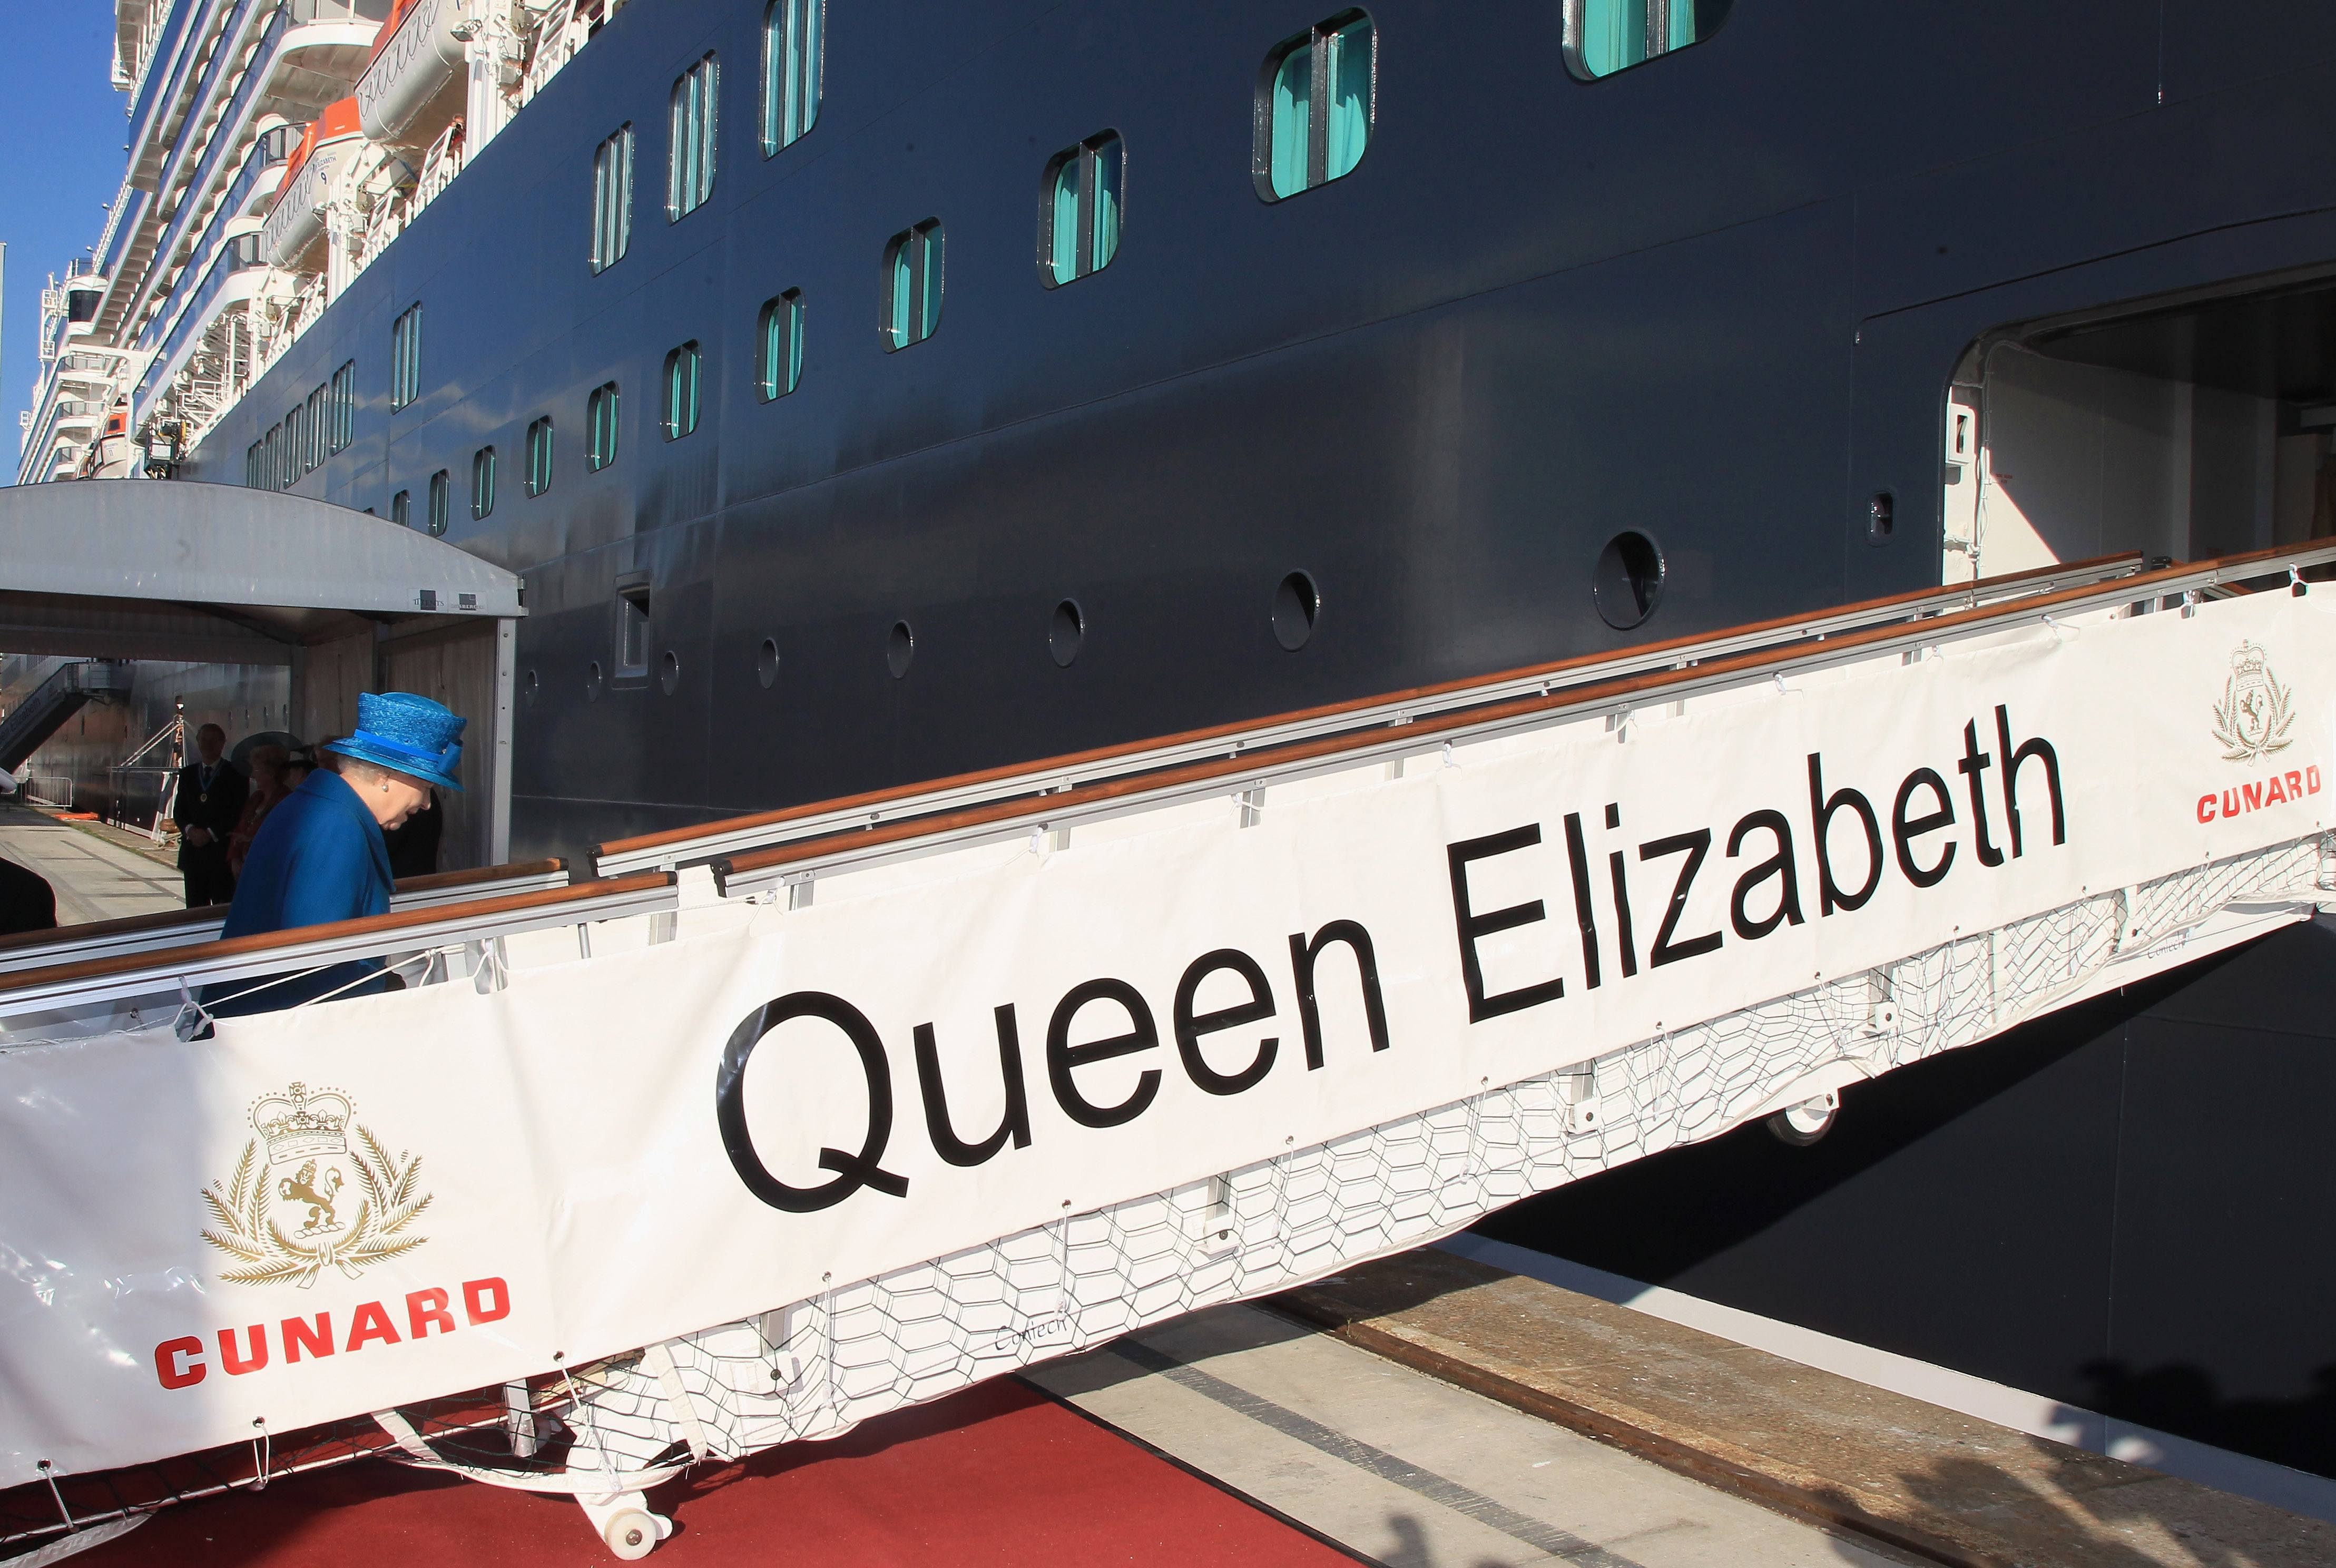 Queen Elizabeth II arrives to name Cunard's new cruise-liner